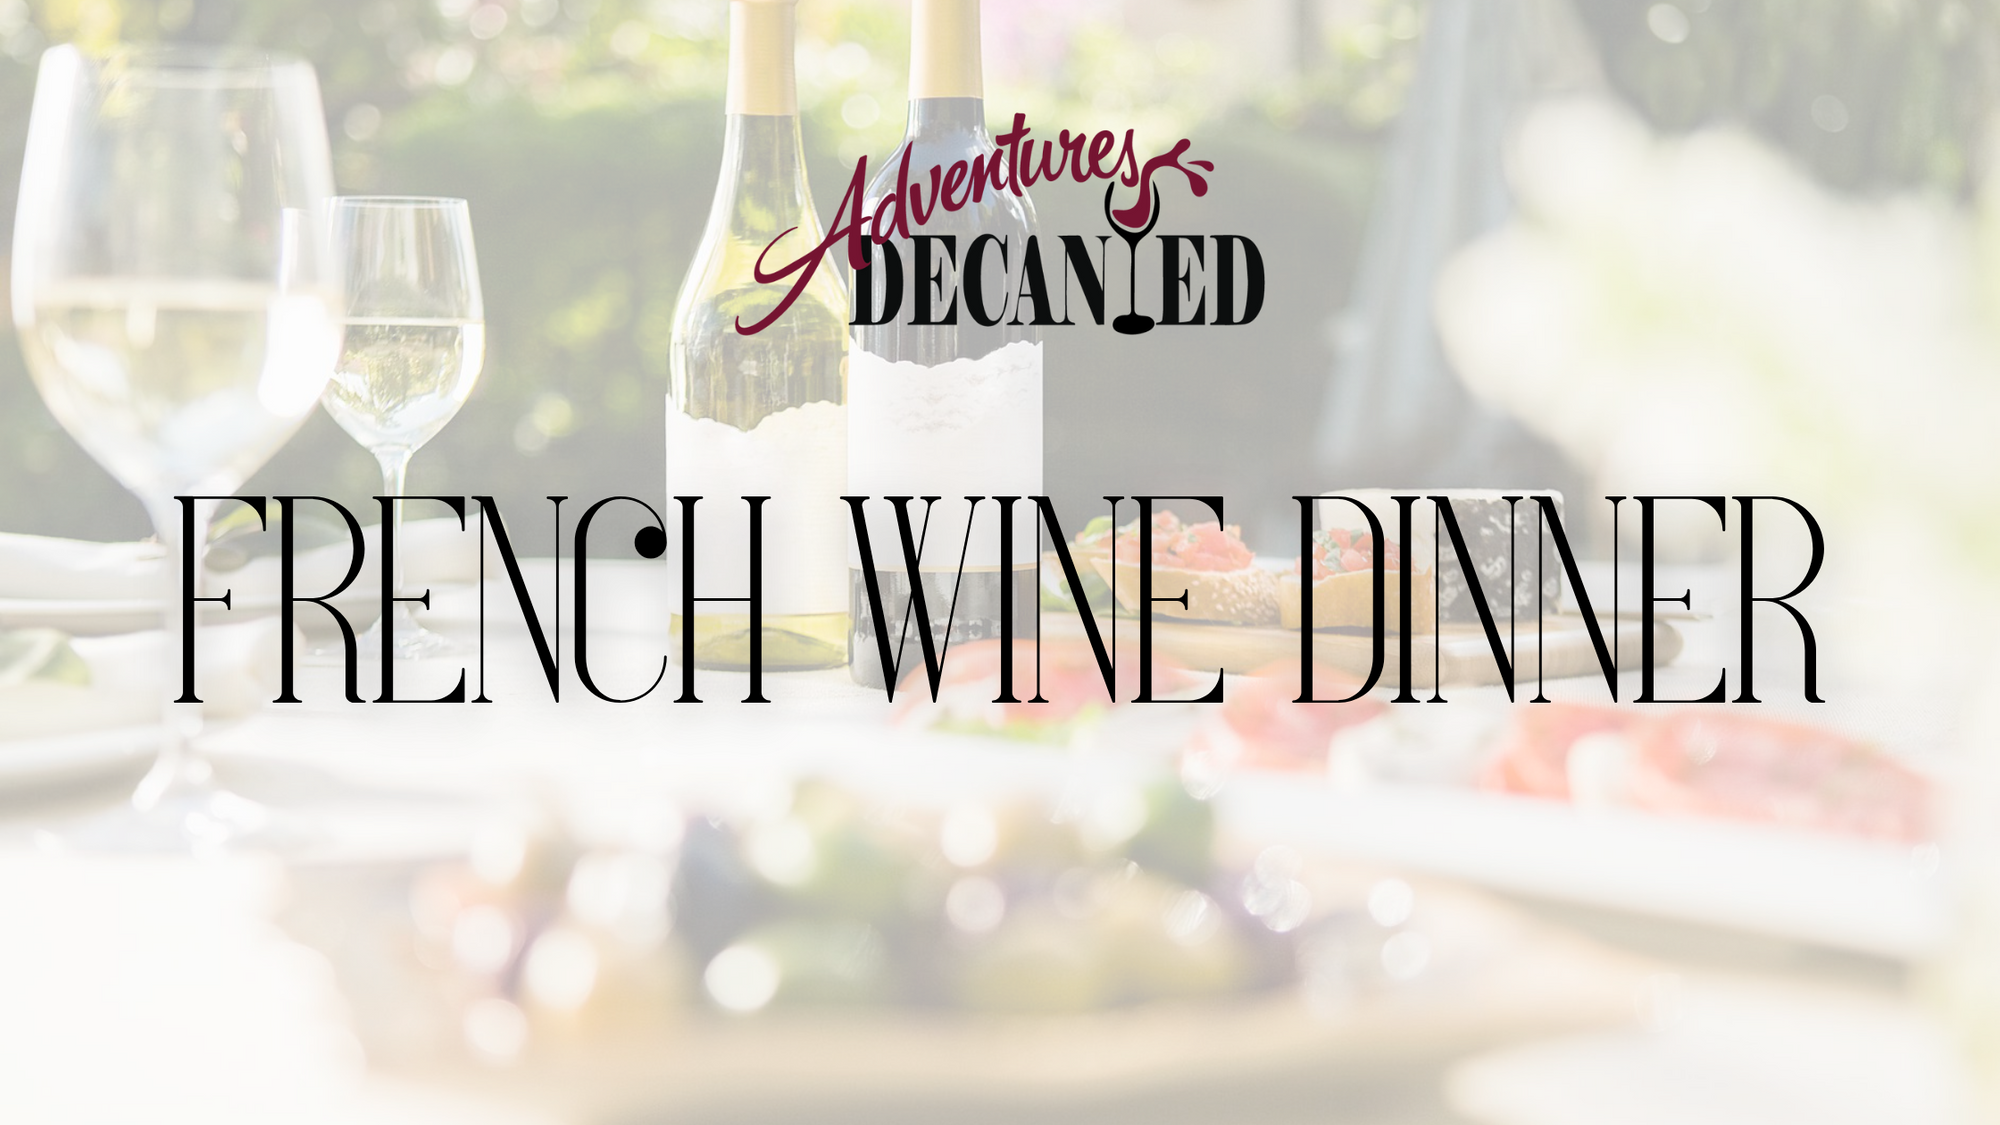 Friday, July 29th: French Wine Dinner